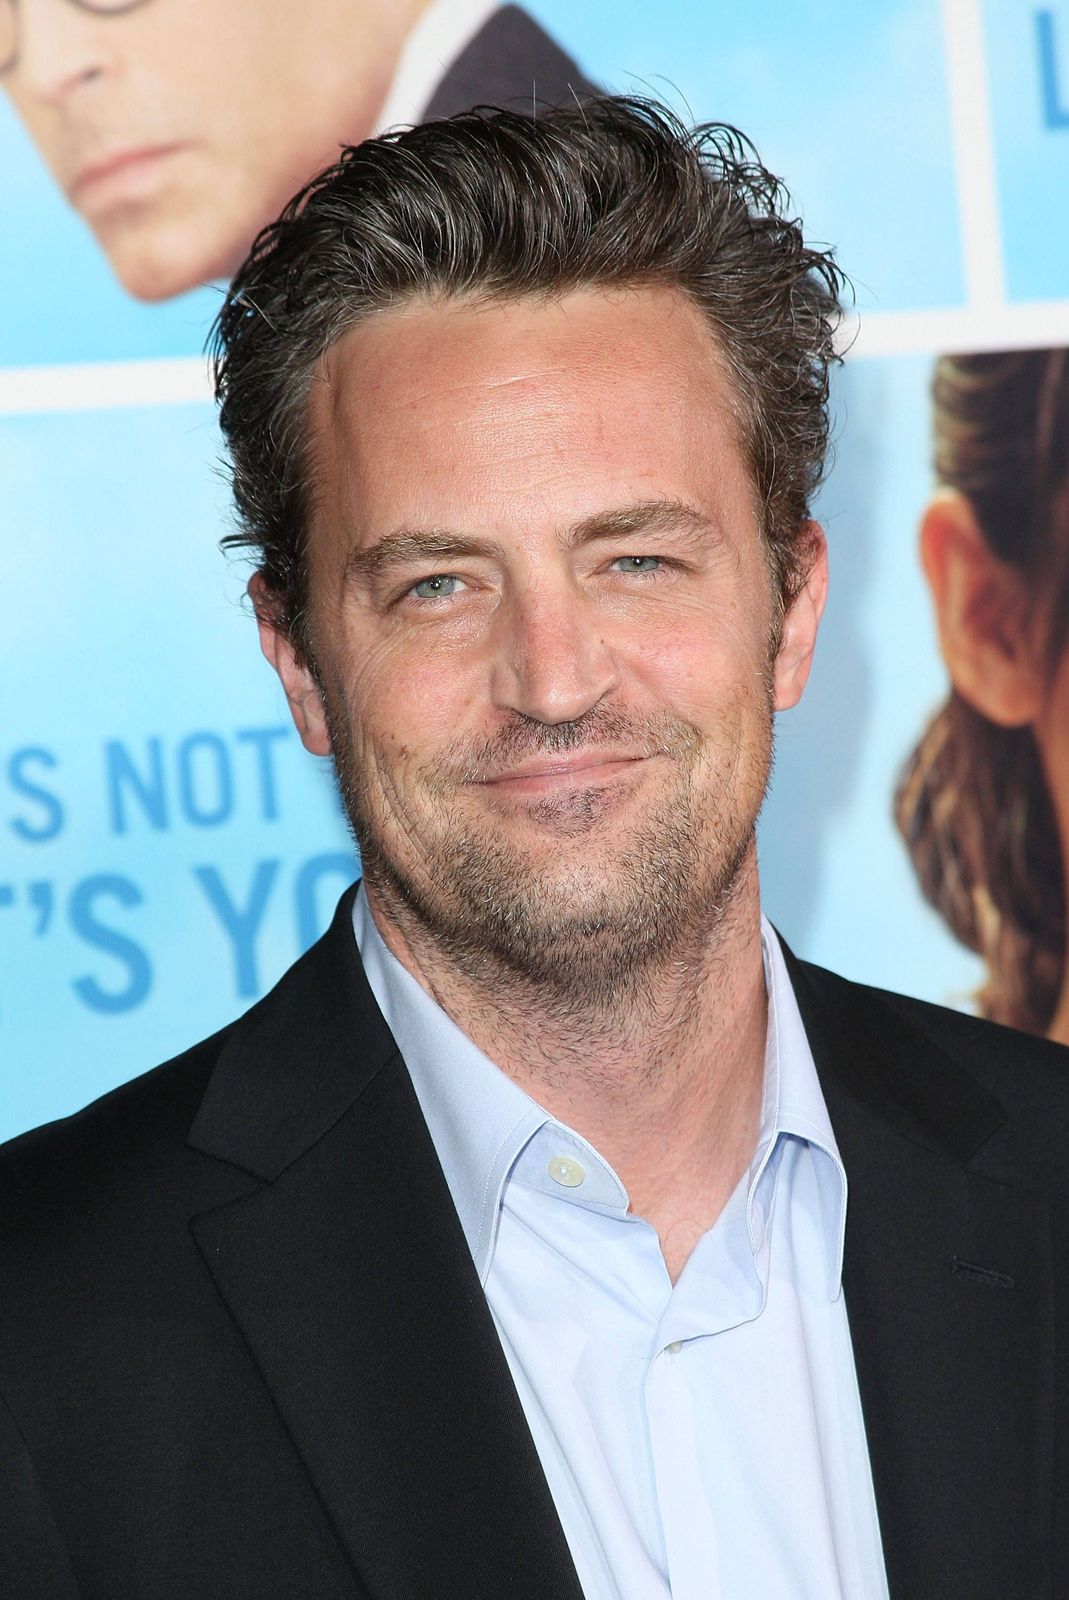 Friends Star Matthew Perry Gets Engaged To Long Time Girlfriend Molly Hurwitz